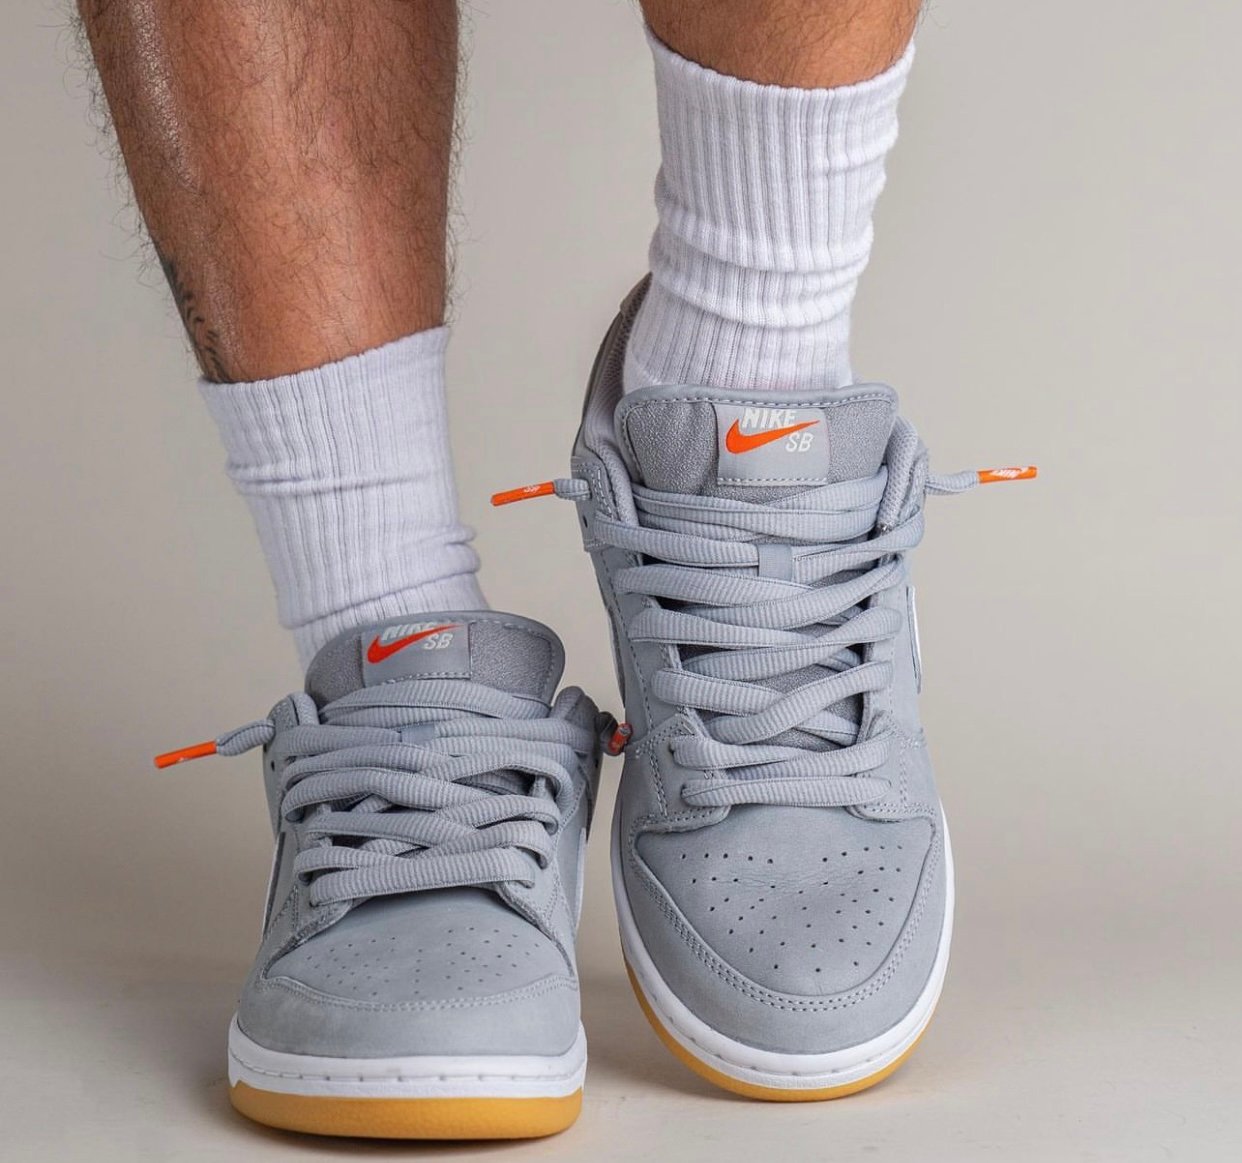 Nike SB Dunk Low Wolf Grey Gum DV5464-001 Release Date + Where to